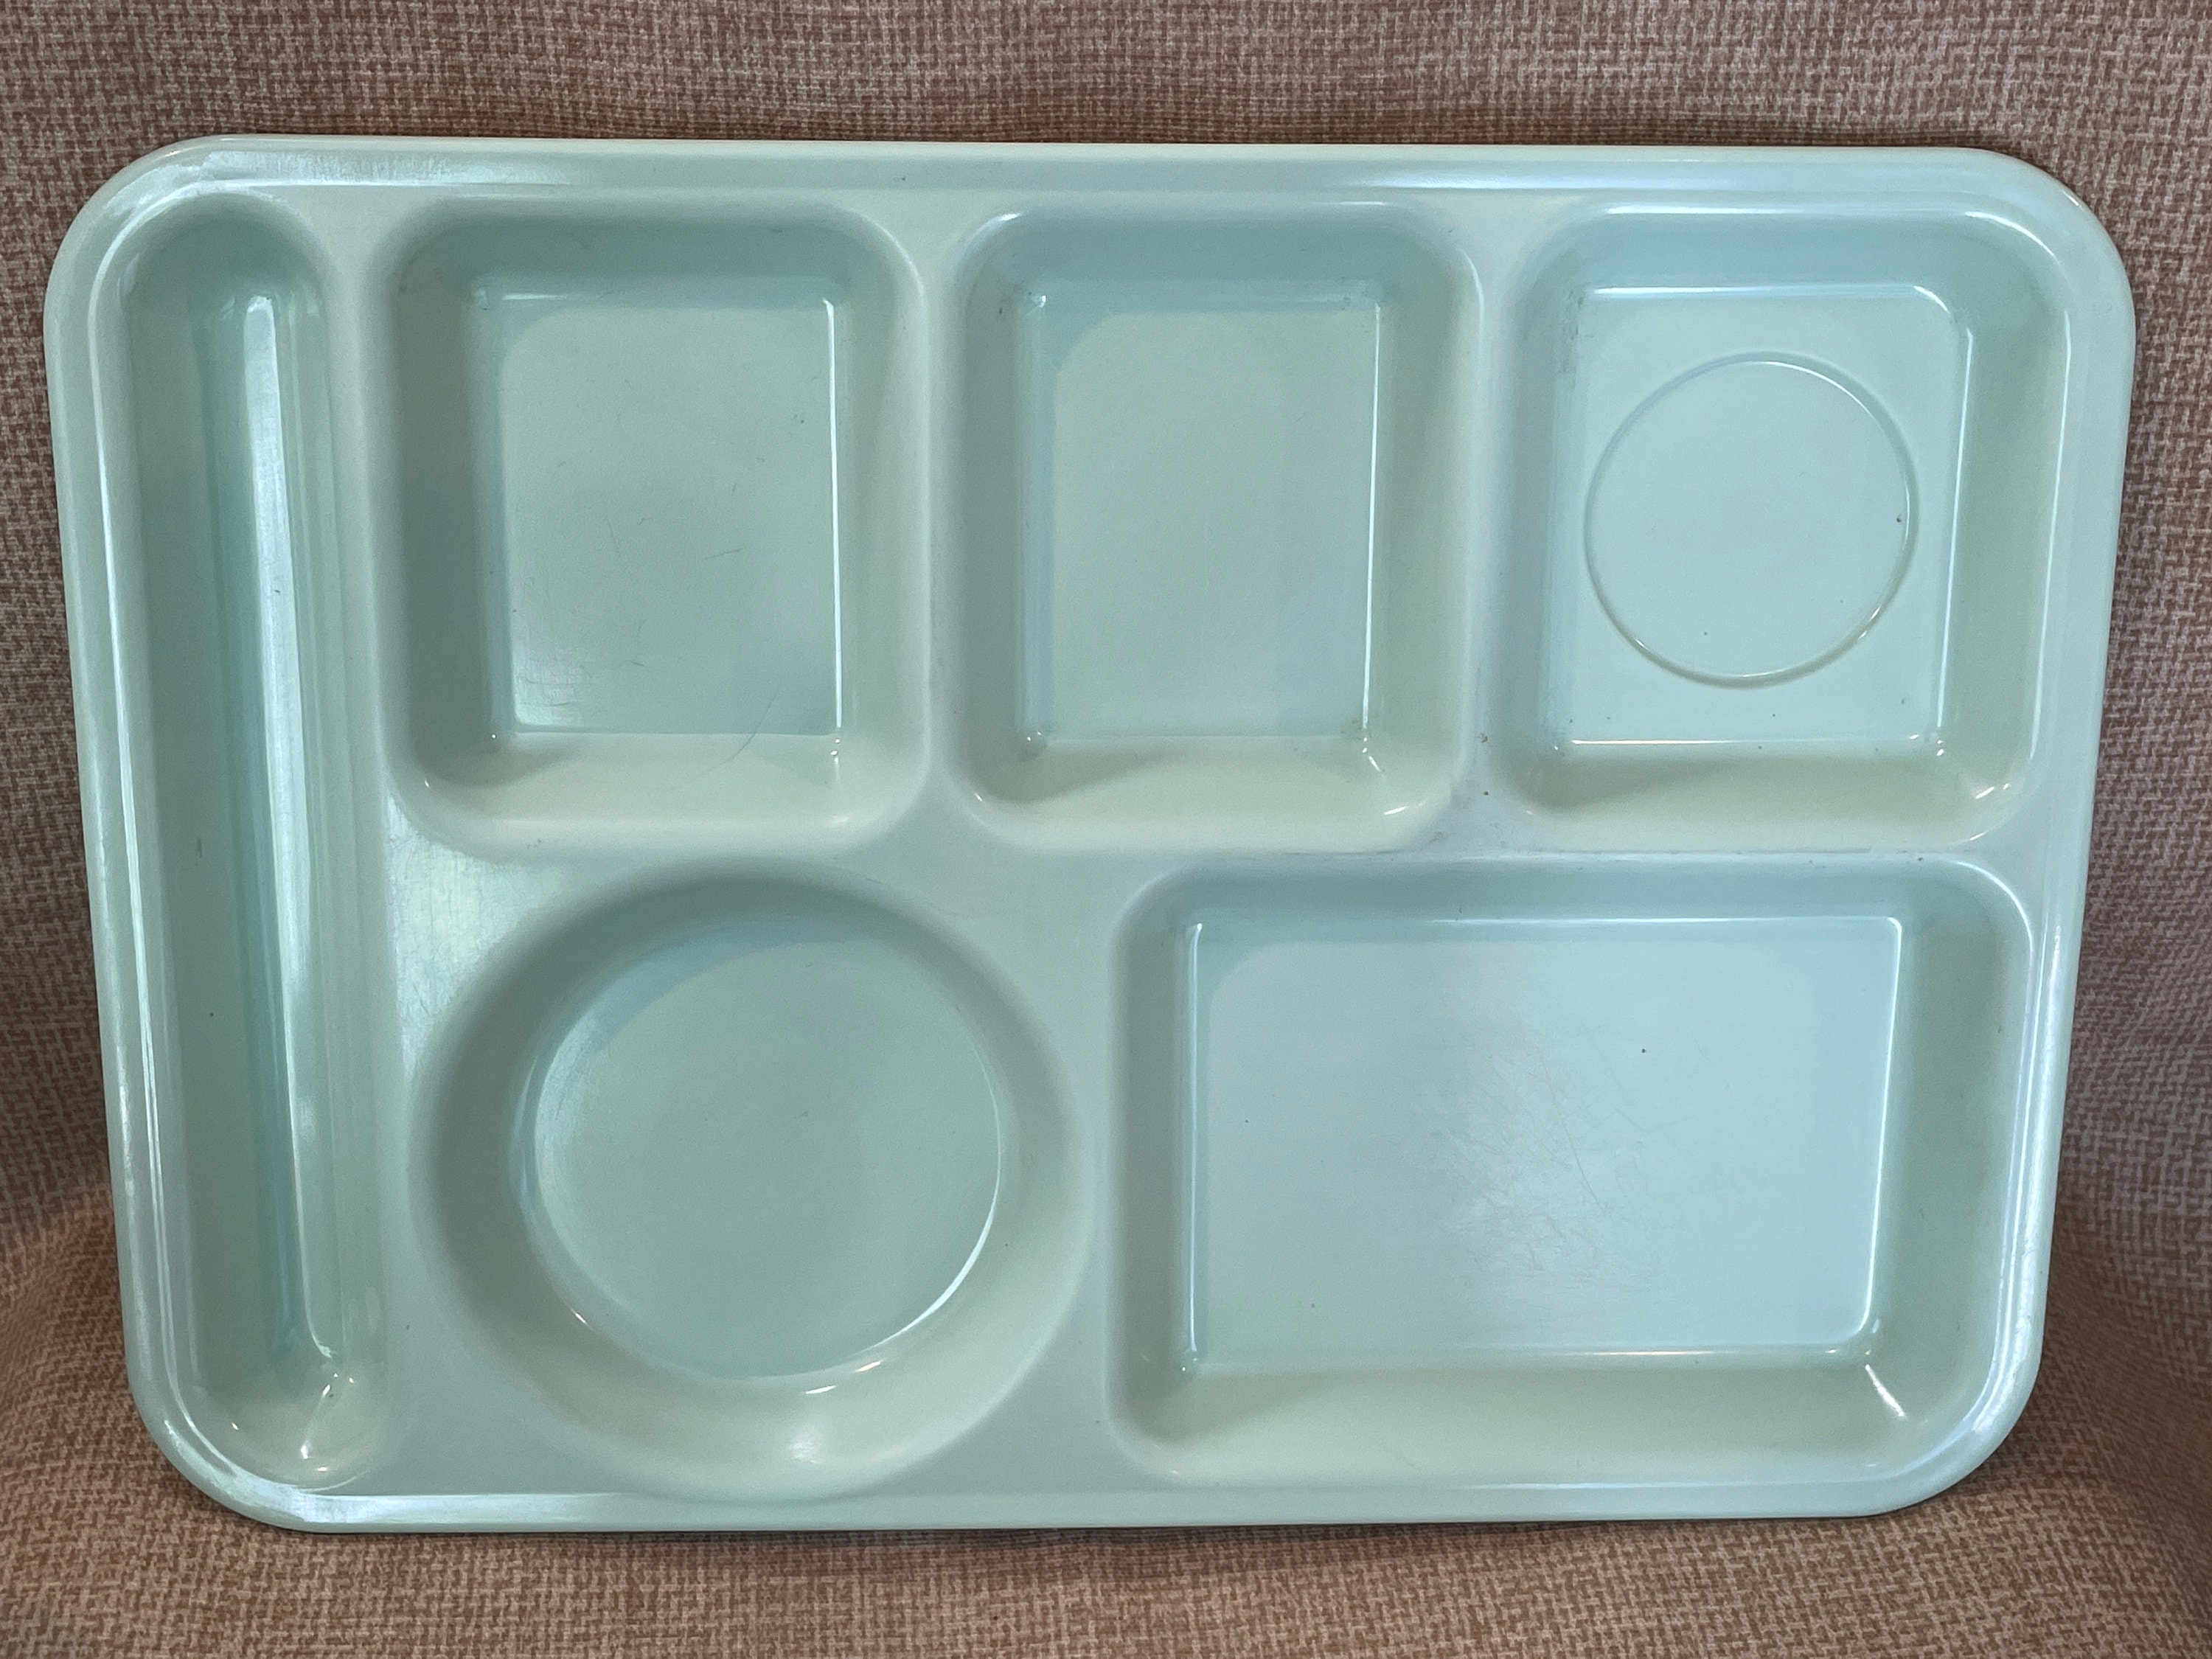 Vintage Voilrath Lunch Tray / School Lunch Trays / Home School Lunch Trays  / Preschool Lunch Trays / Kids Camping Trays 